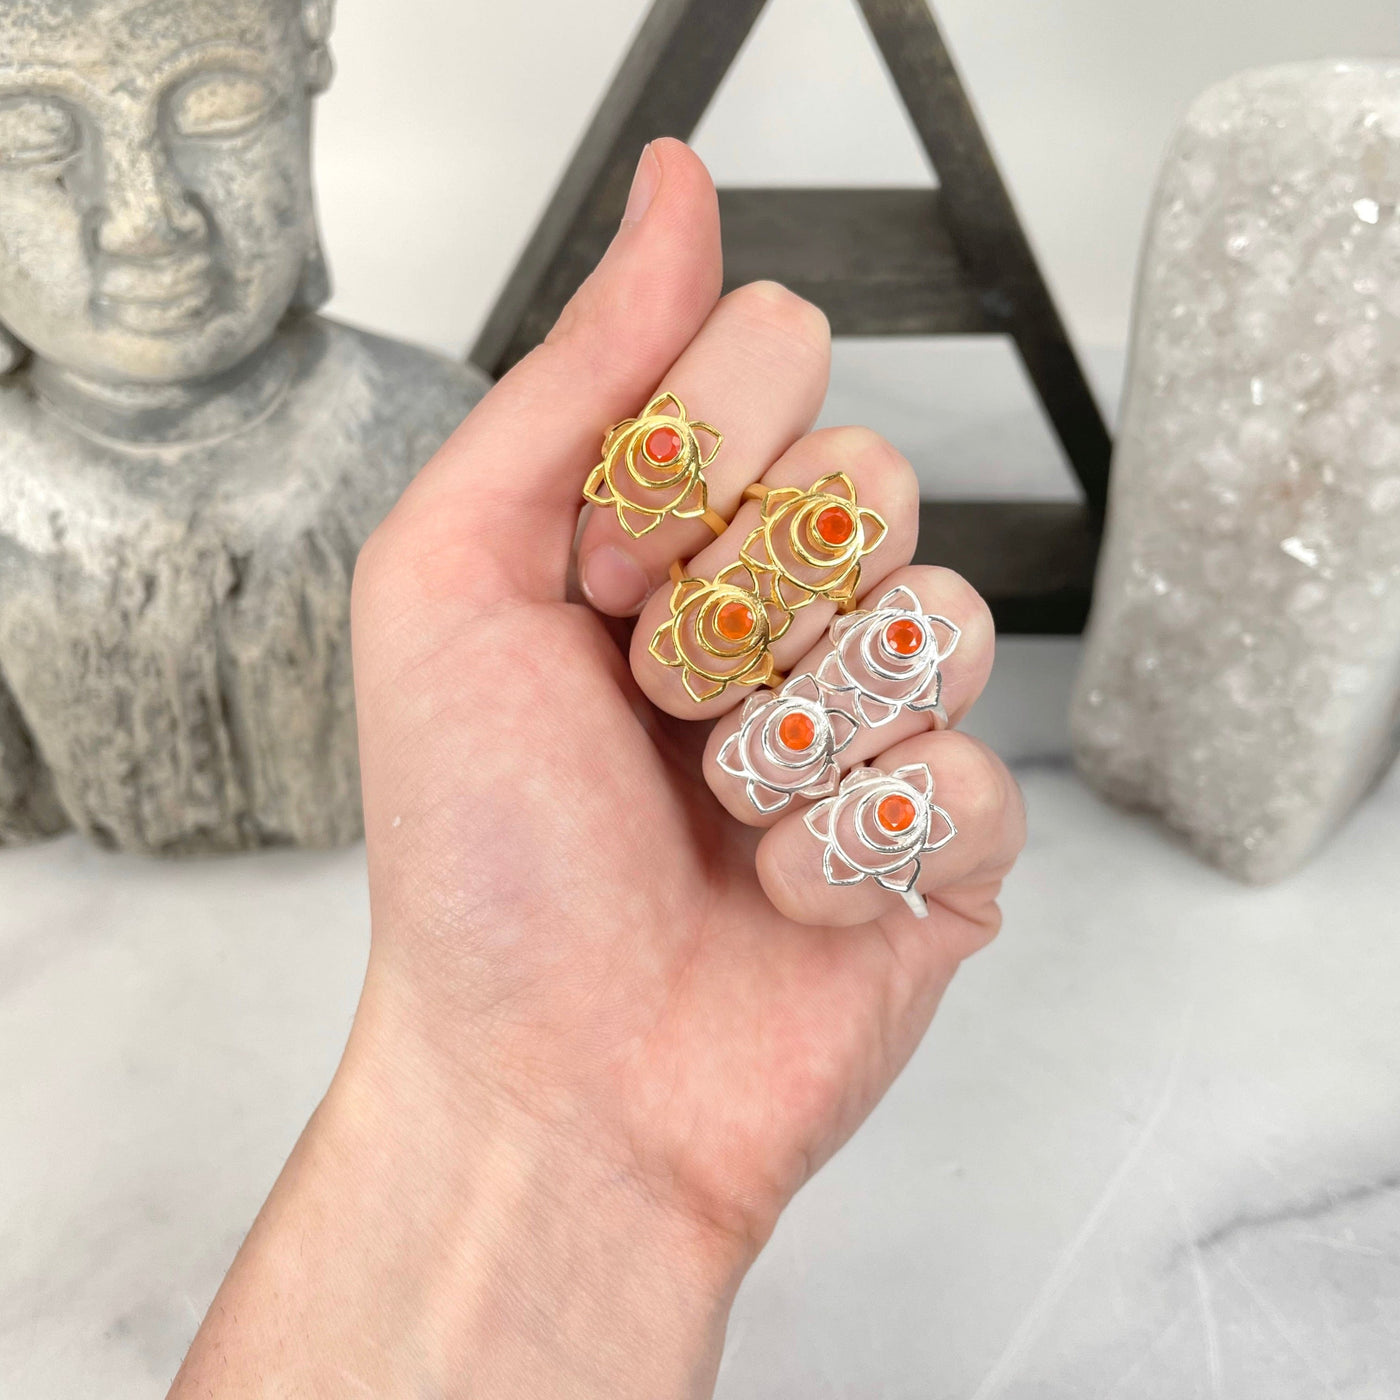 sacral chakra rings in hand for size reference